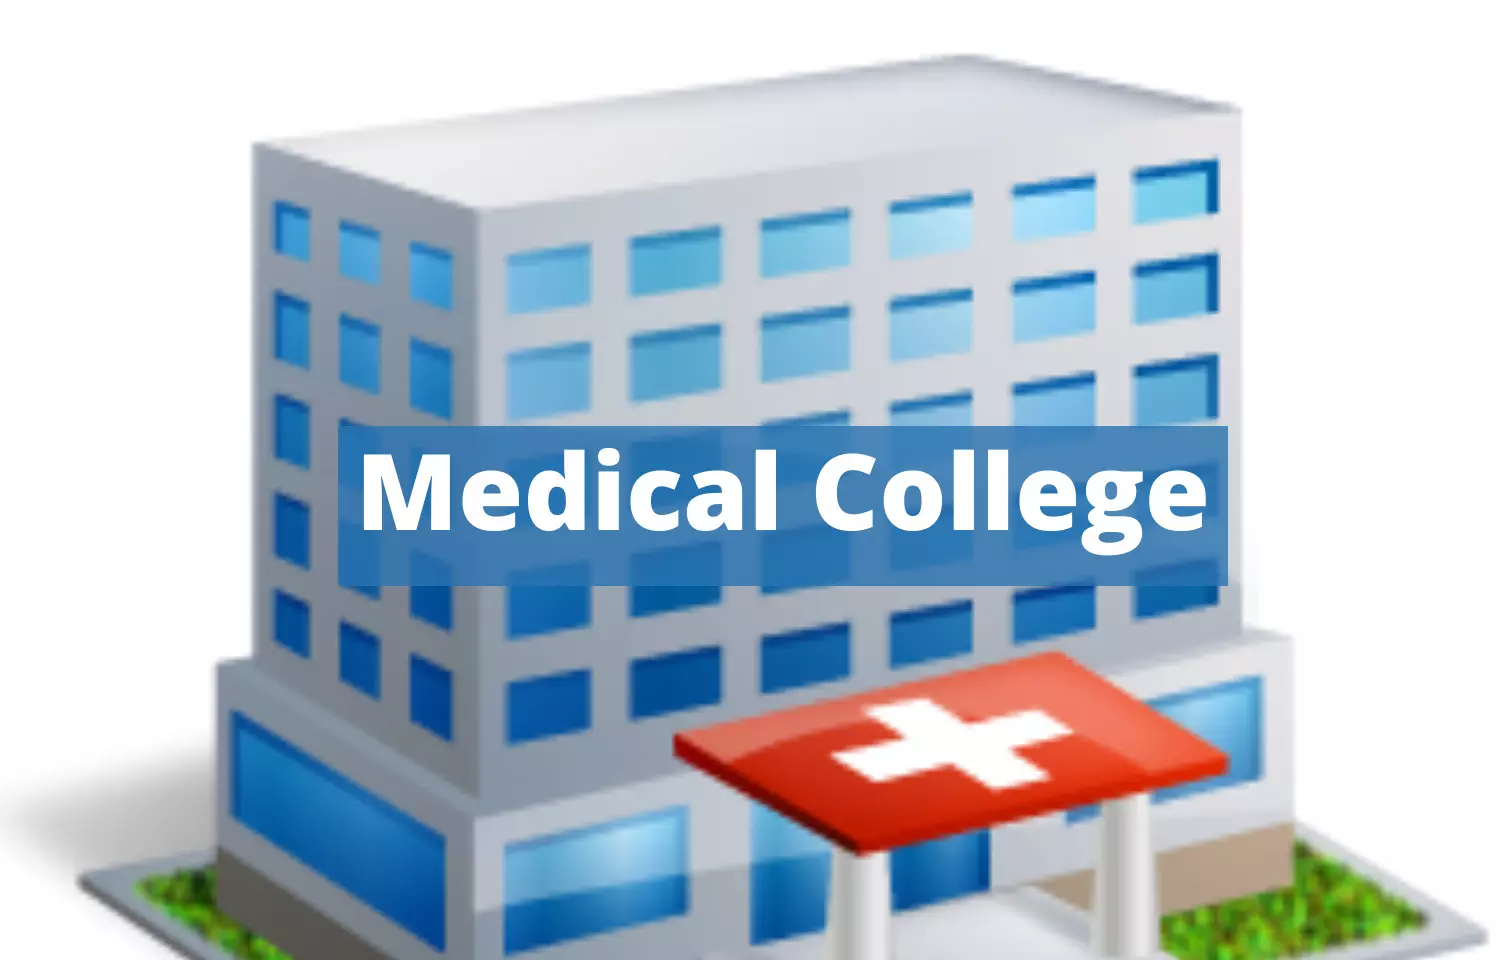 Dhubri medical college to be commissioned this Academic year says Assam Health Department